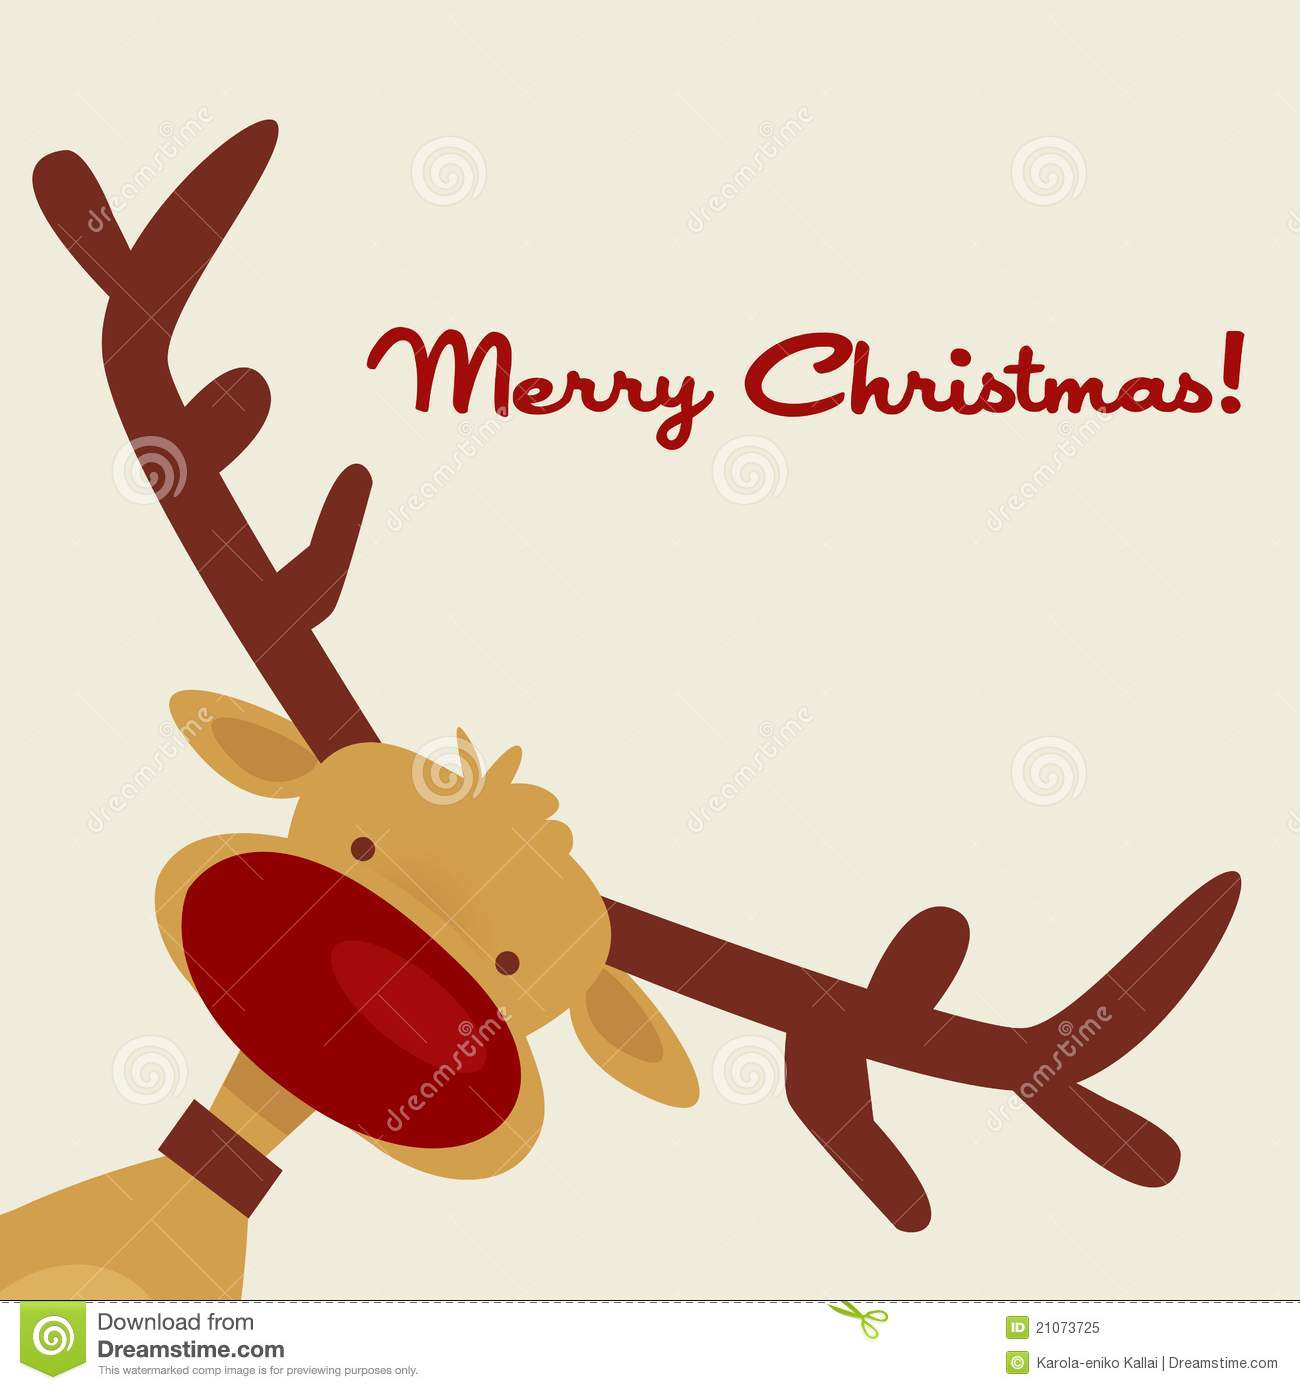 Christmas Card With Reindeer Royalty Free Stock Photo   Image